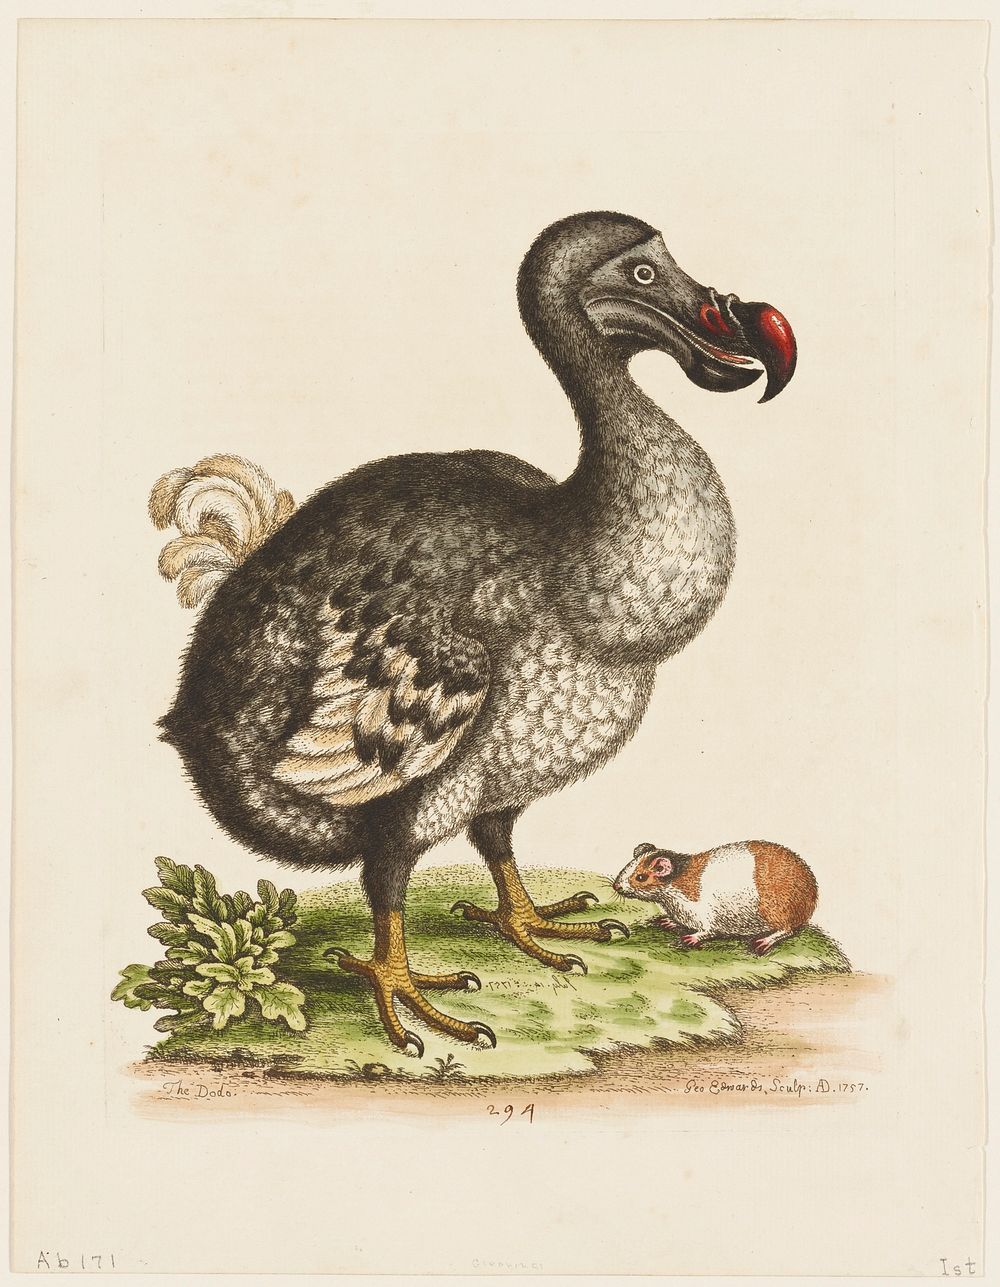 Dodo Images | Free Photos, PNG Stickers, Wallpapers & Backgrounds ...